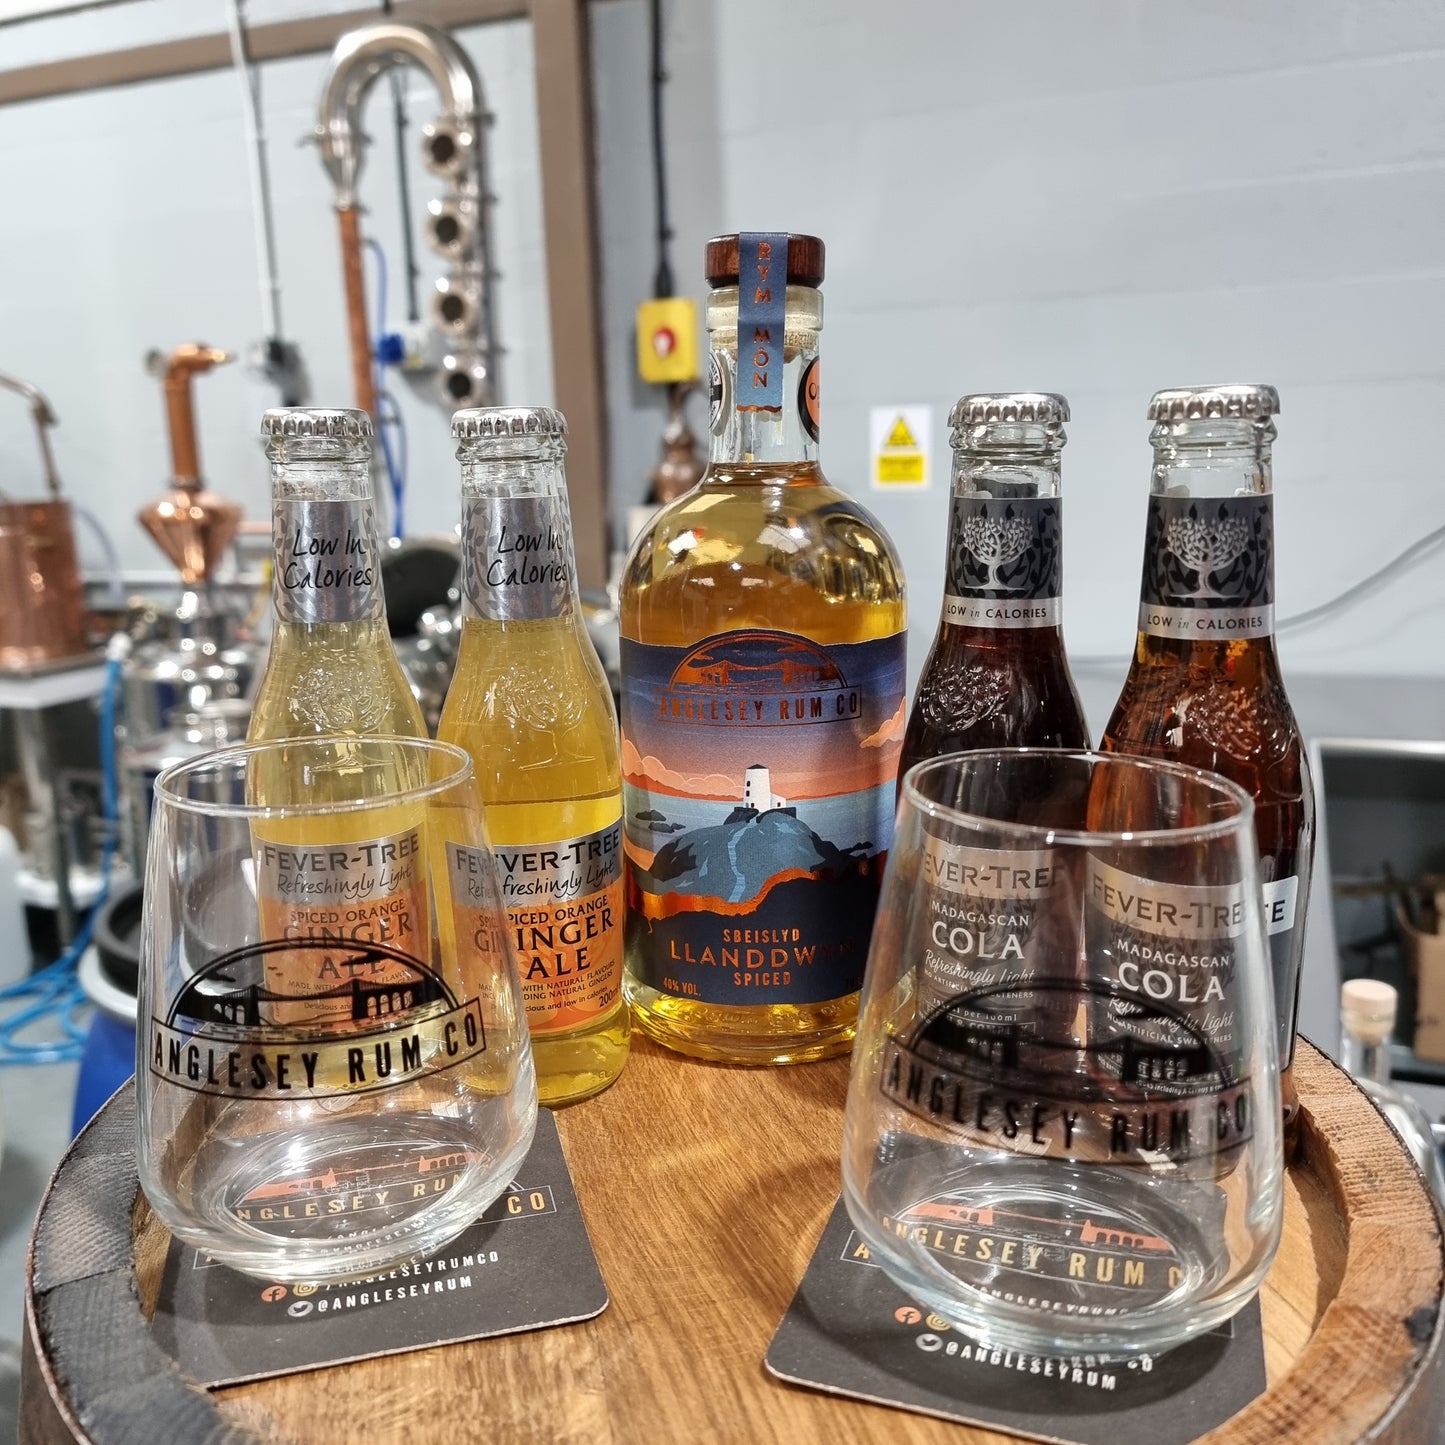 Anglesey Rum Co Bundle